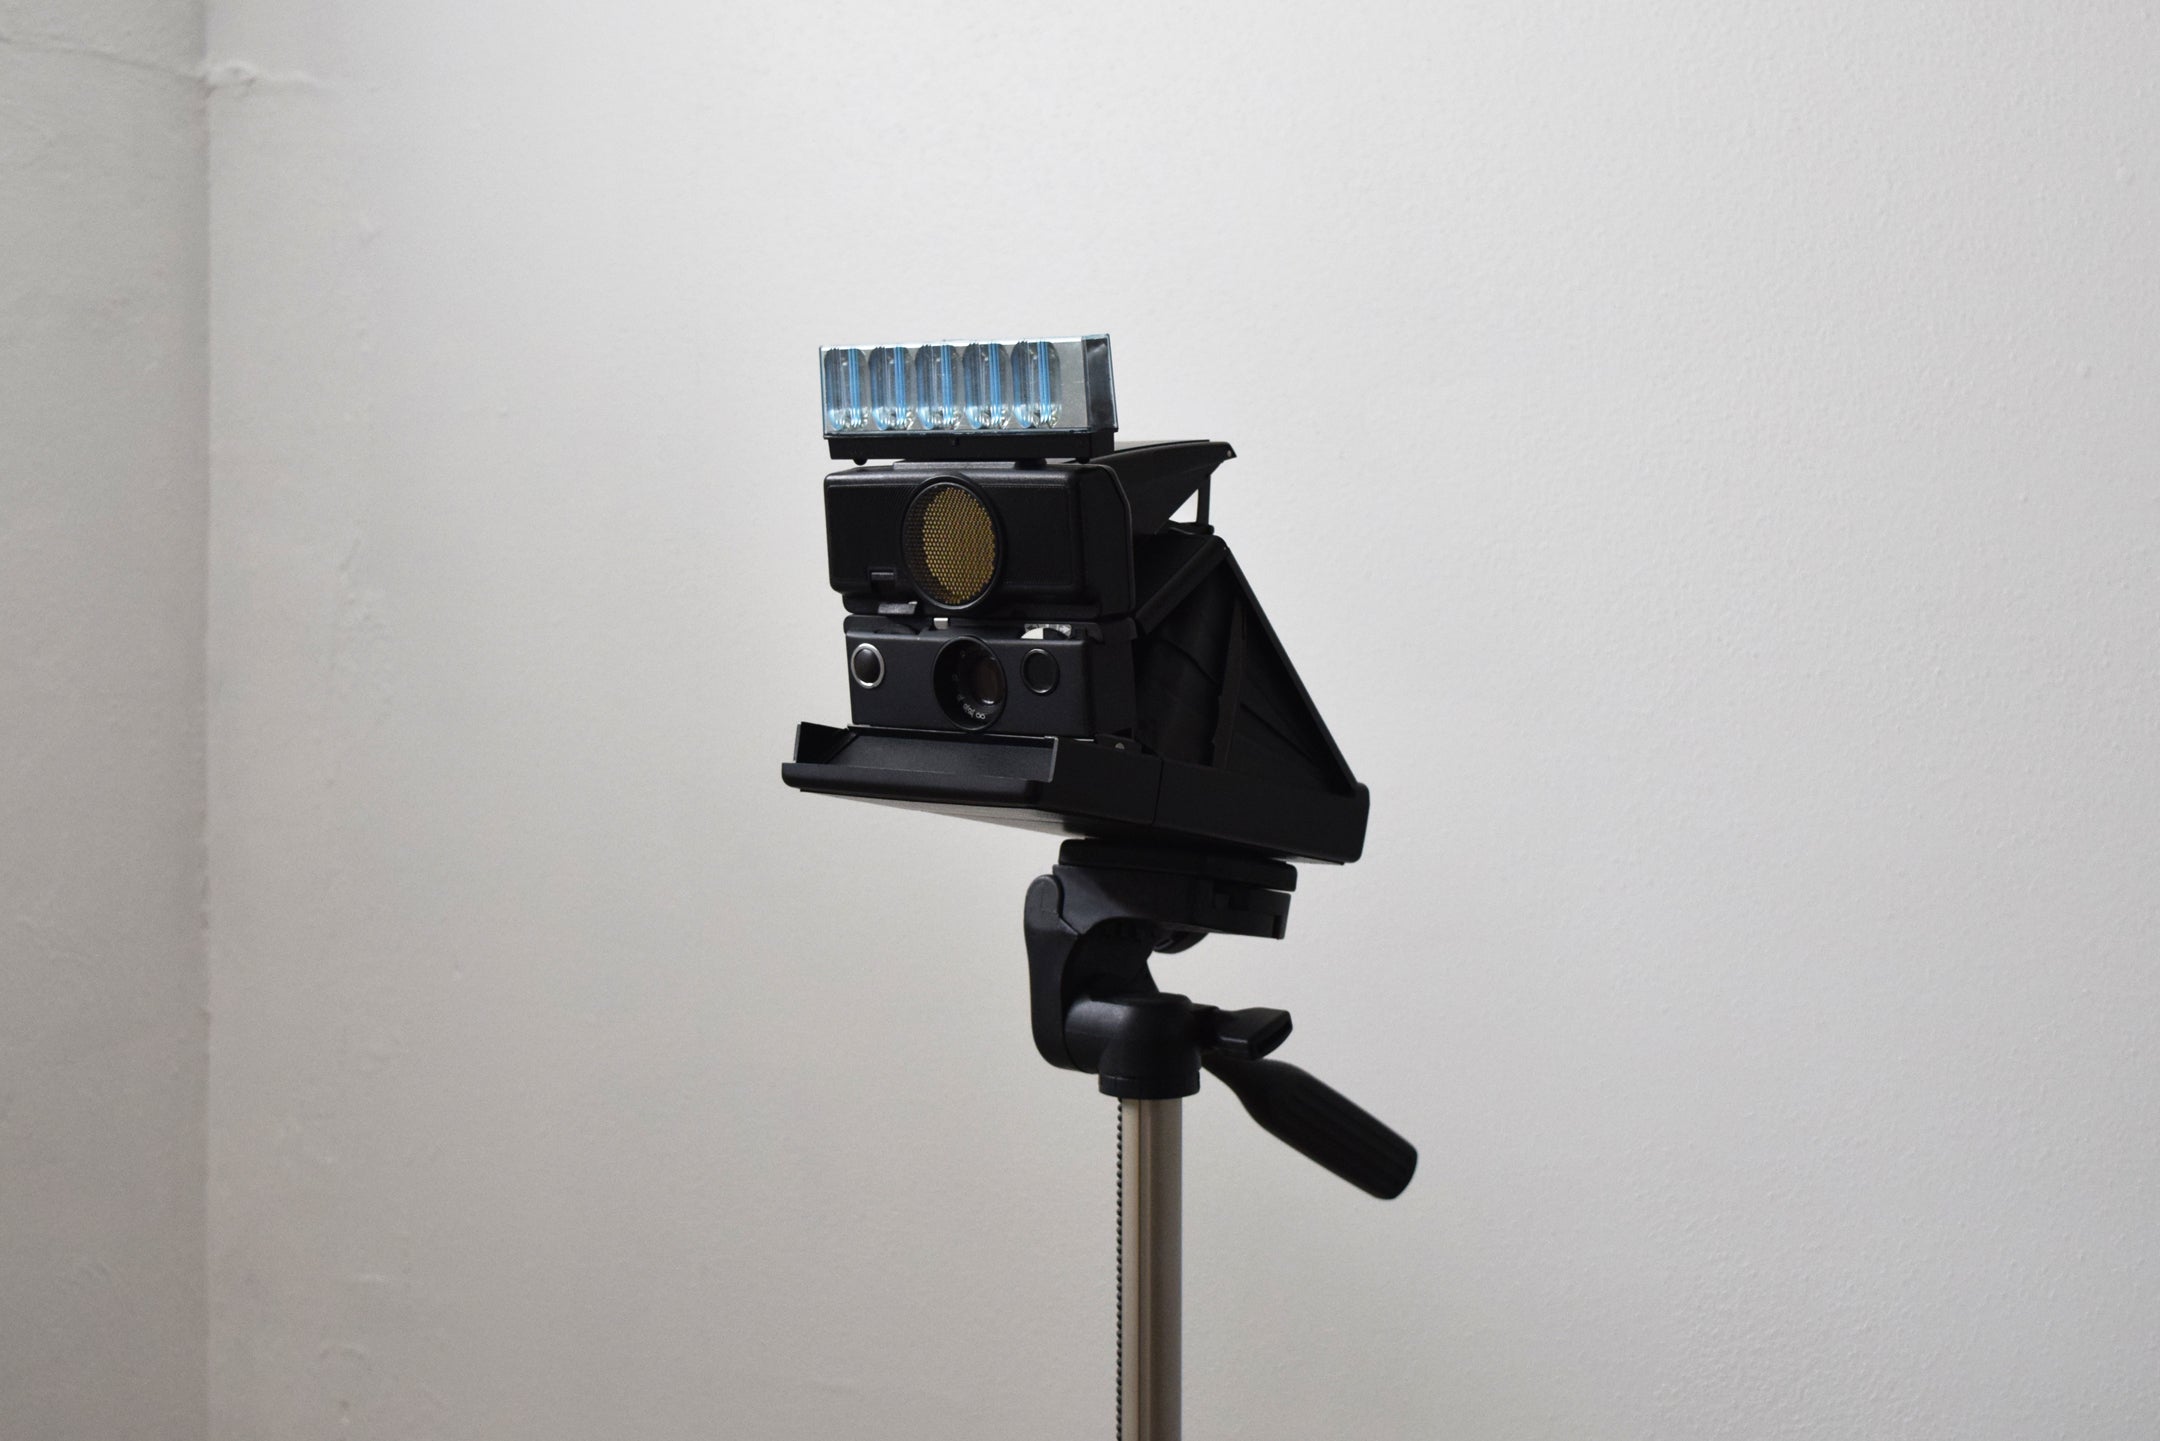 SX70 to 600 conversion camera with Flash and Tripod